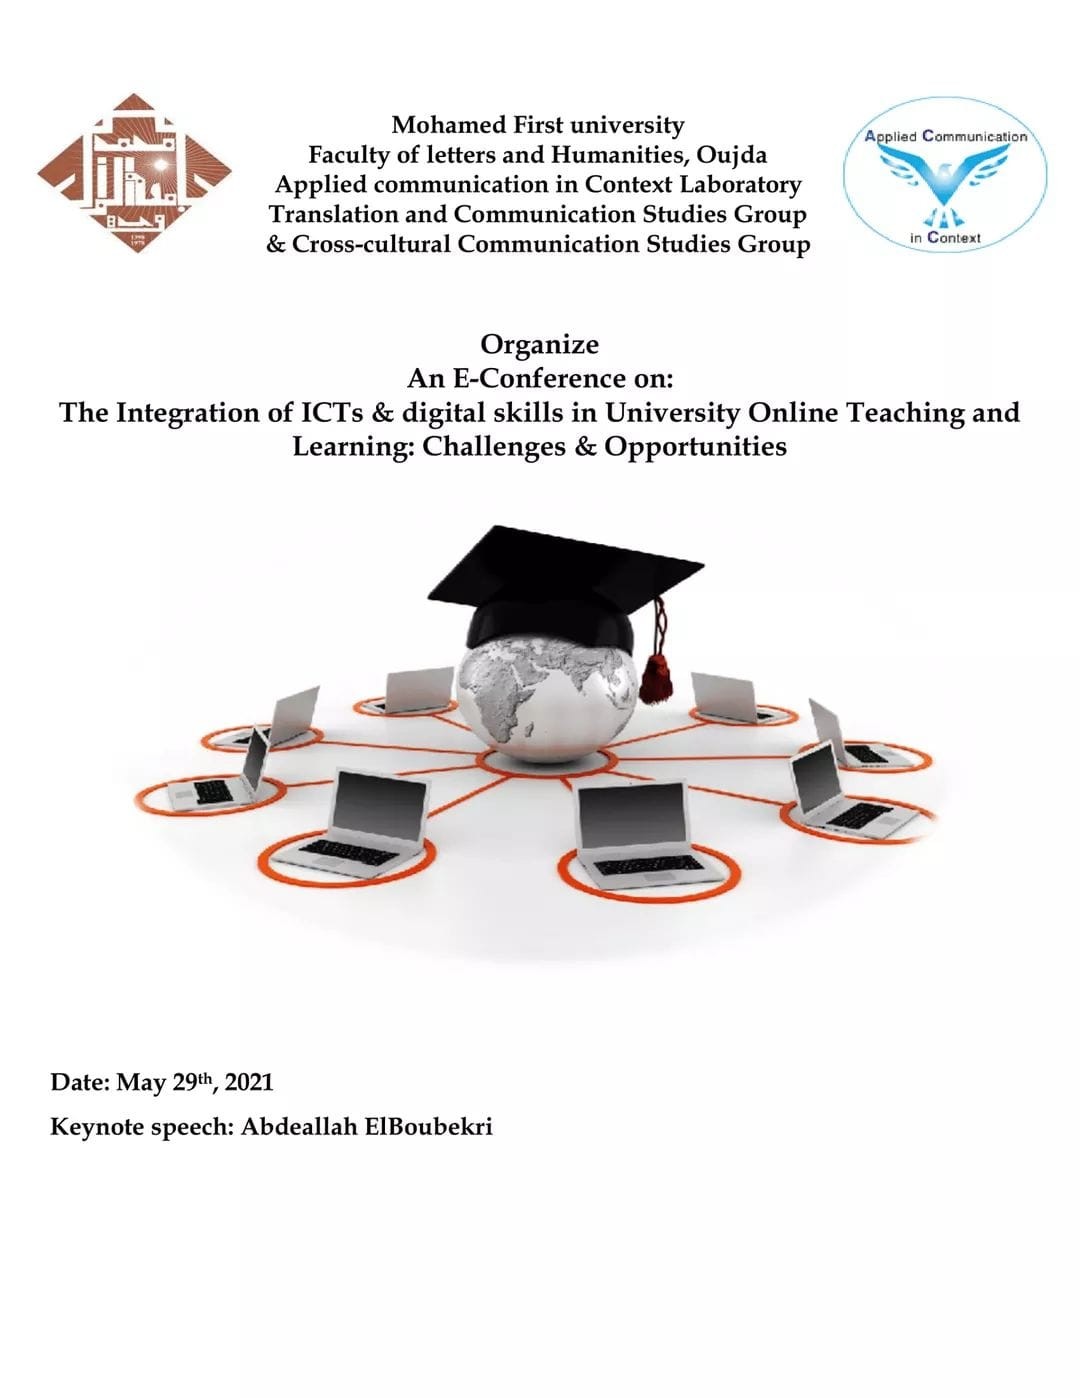 The Integration of ICTs & digital skills in University Online Teaching and Learning